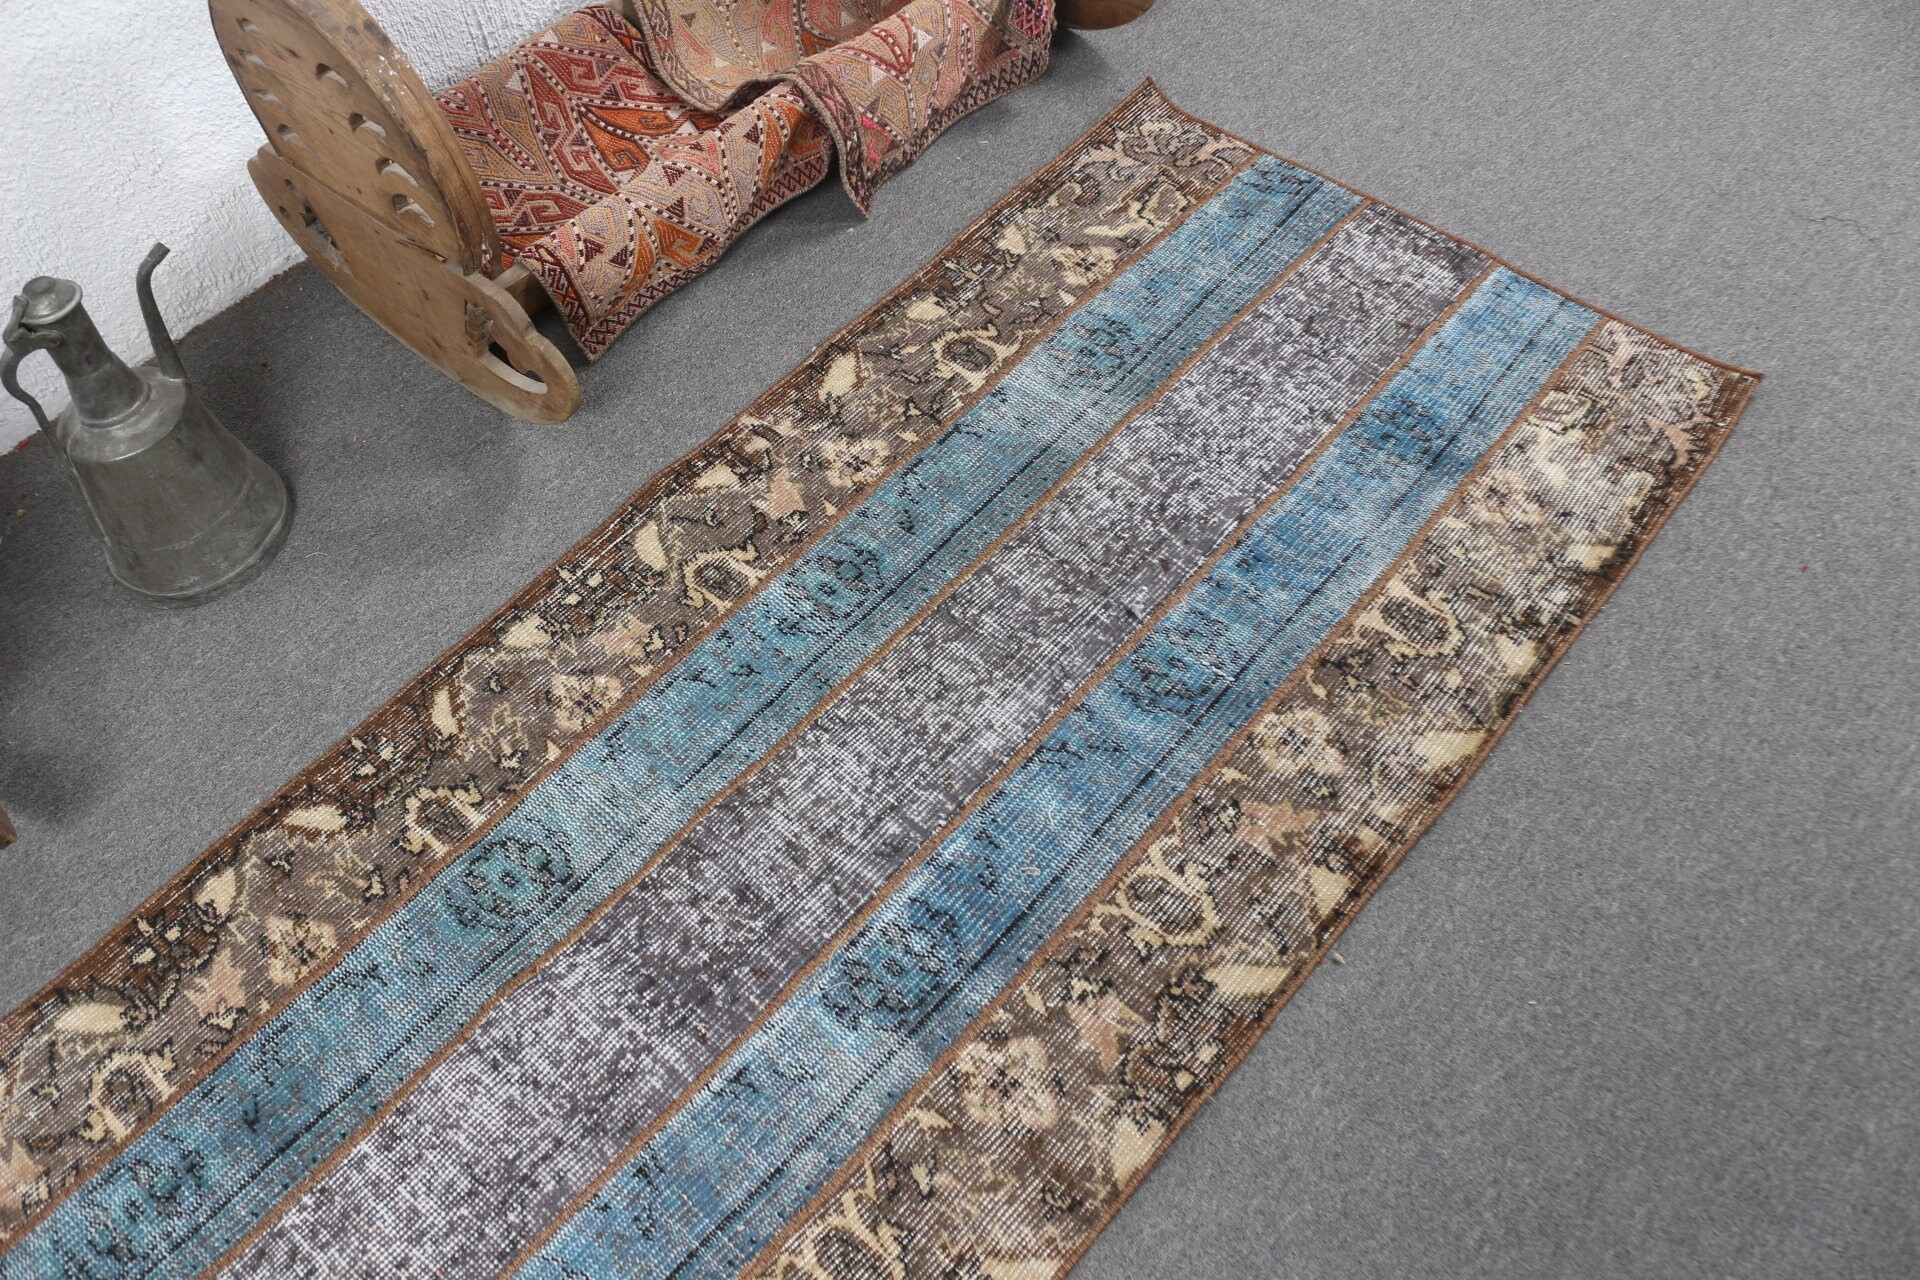 Blue Home Decor Rugs, Vintage Rug, Old Rugs, Corridor Rug, Stair Rug, 2.8x7.8 ft Runner Rug, Home Decor Rugs, Turkish Rugs, Cool Rugs